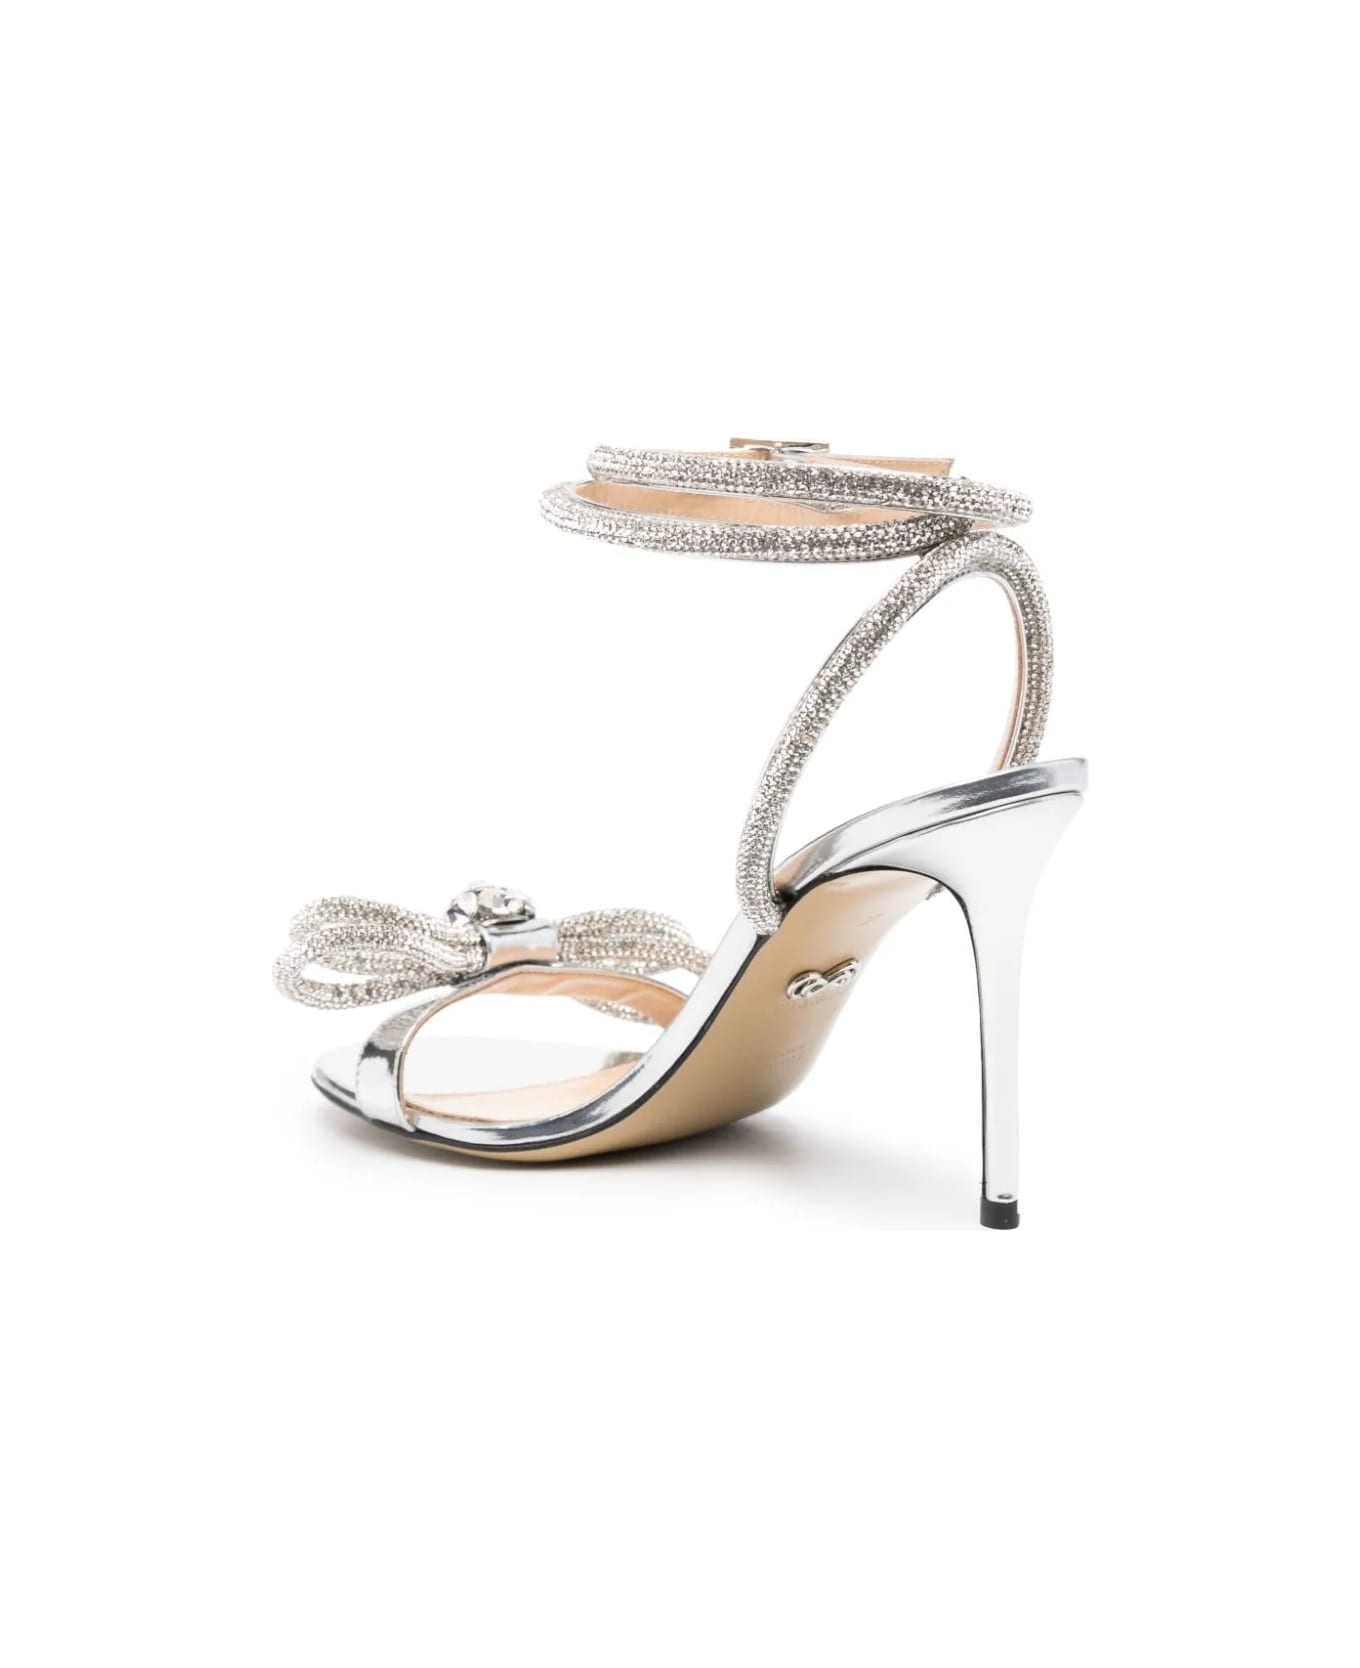 Mach & Mach Double Bow 100 Mm Sandals In Silver Metallic Leather With Crystals - Silver サンダル